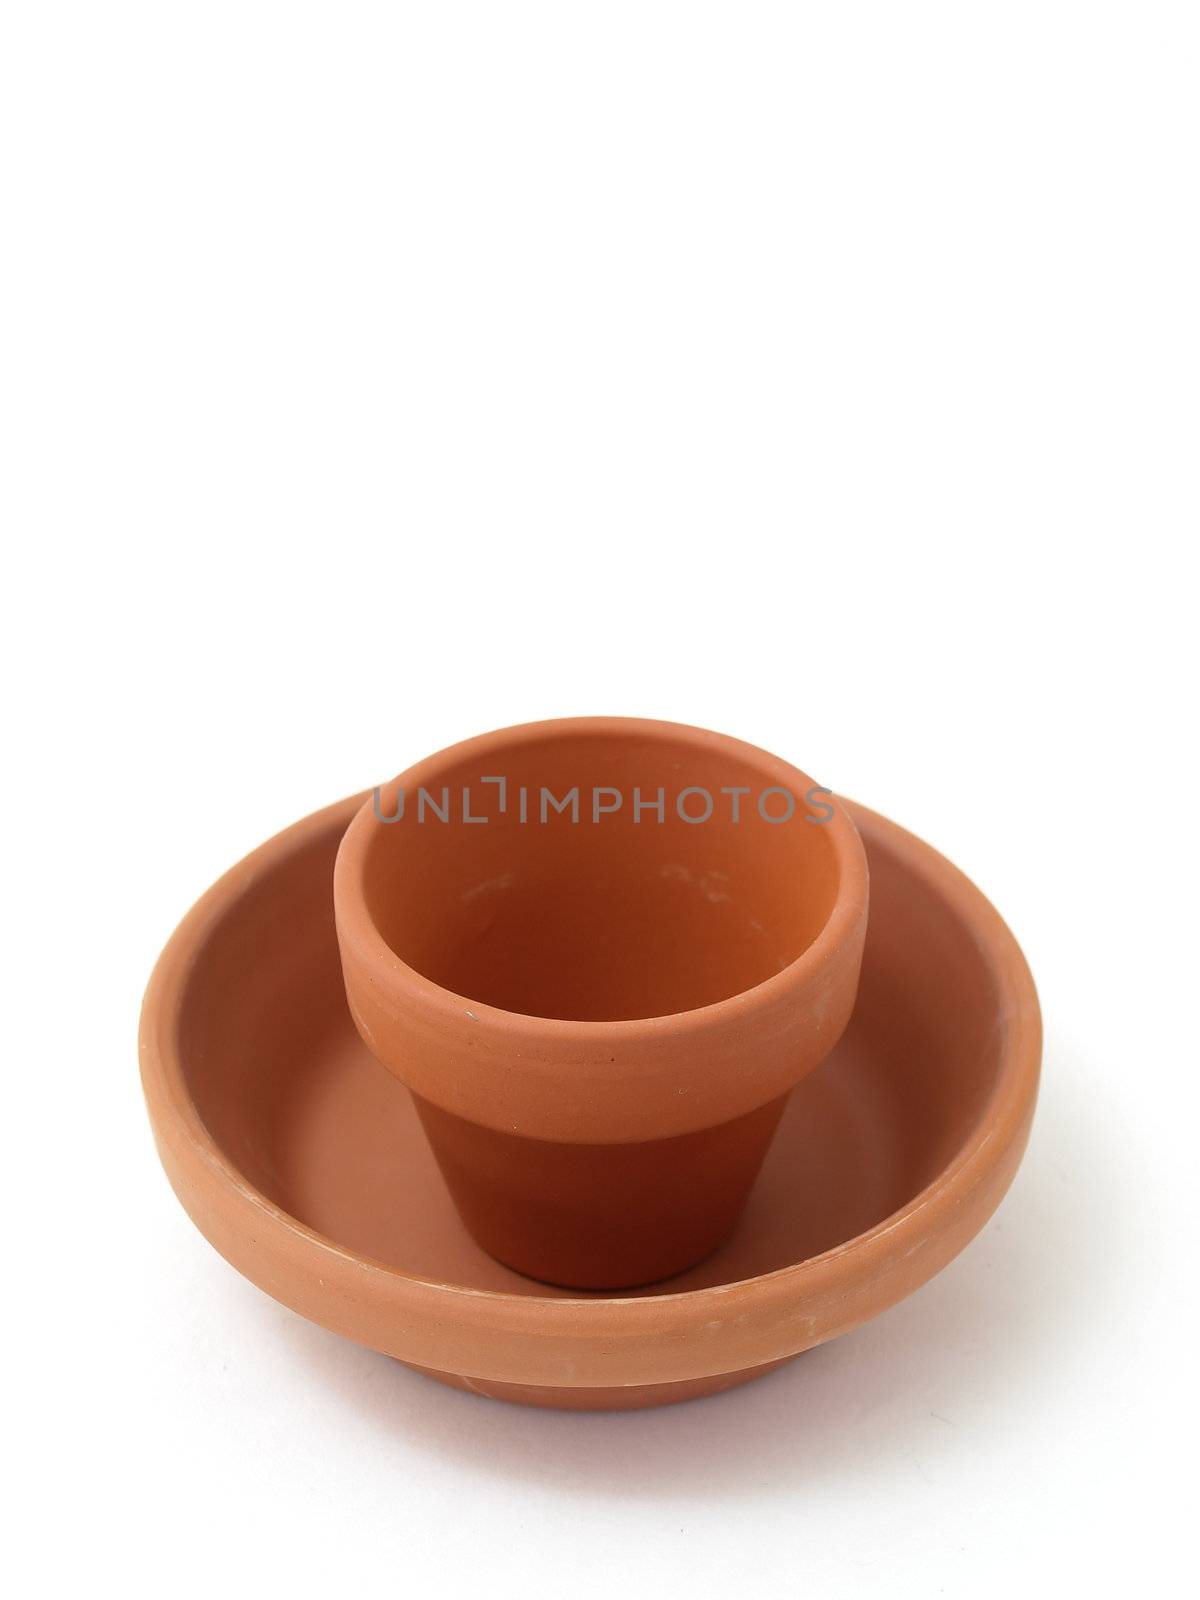 A small terra cotta ceramic pot set in a large saucer. Studio isolated on a white background.